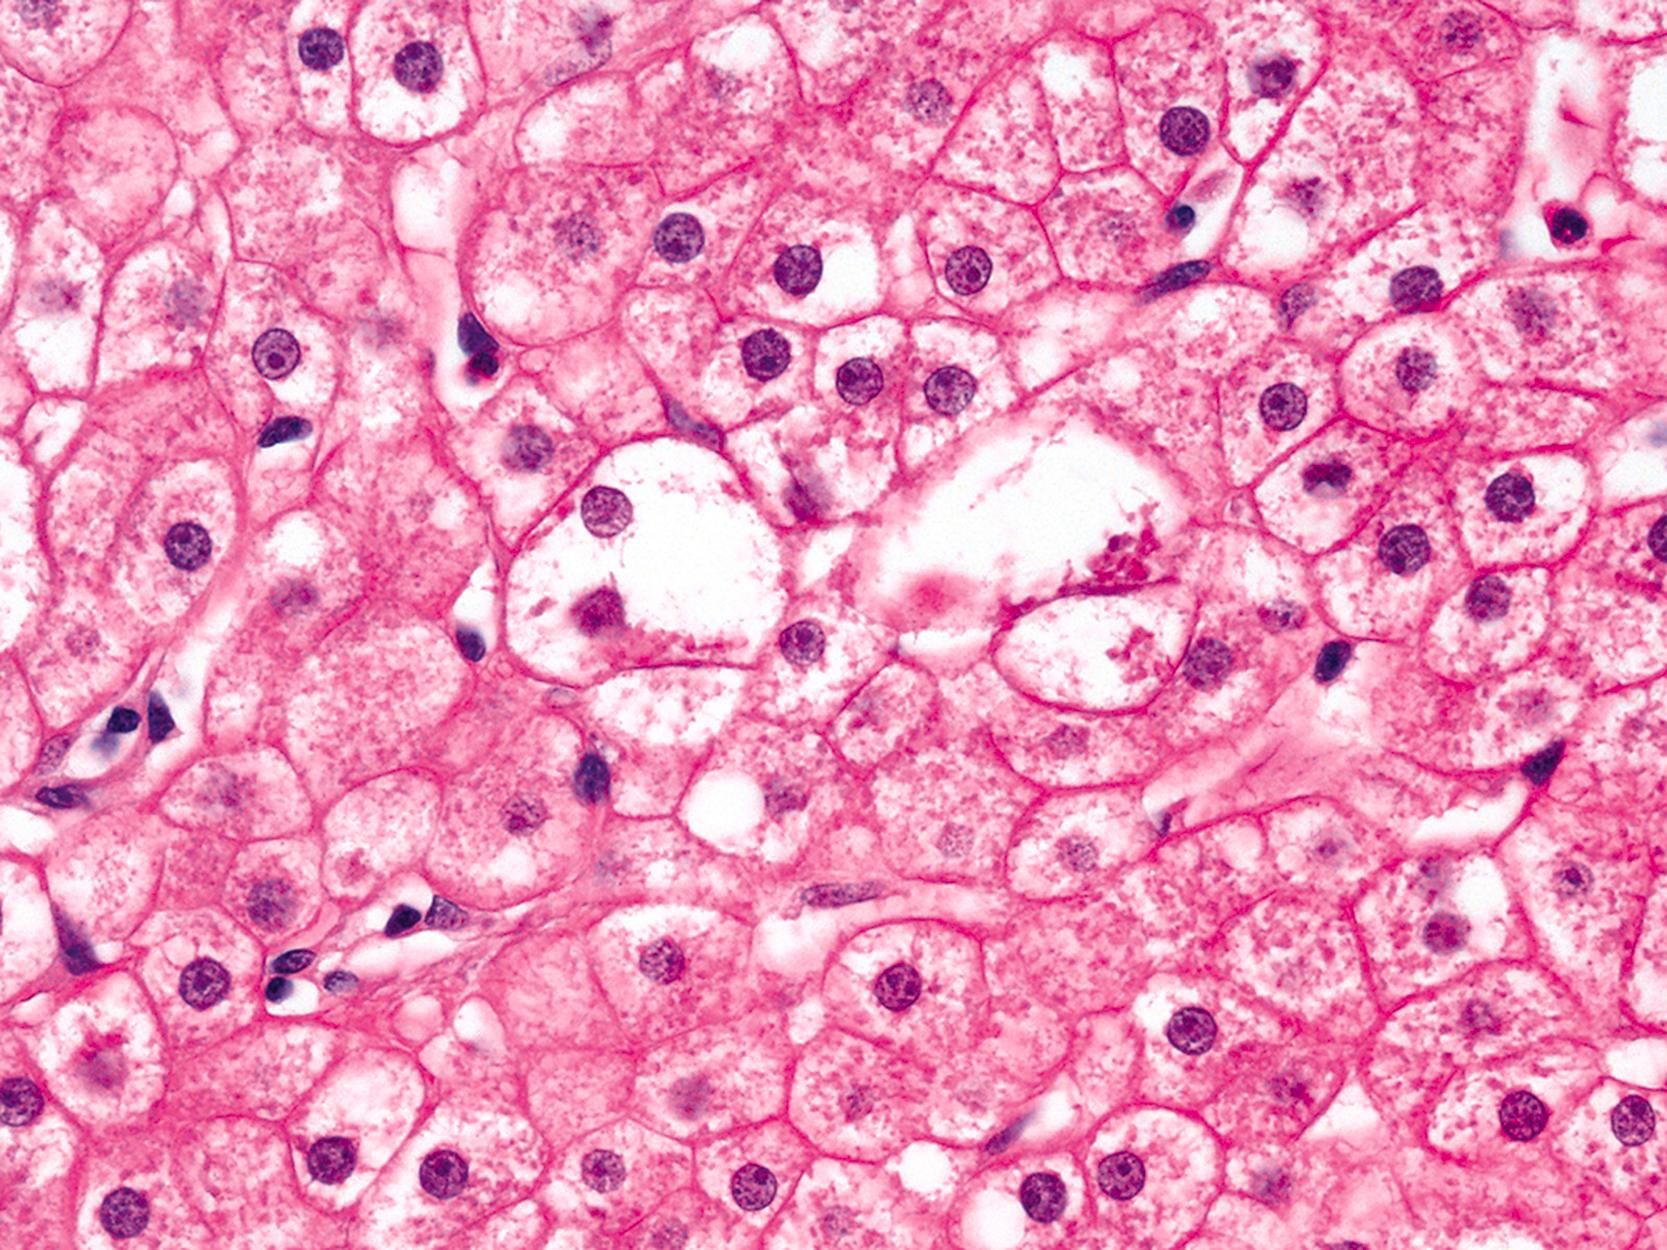 FIGURE 50.1, Ballooned hepatocytes are easily distinguished when surrounded by normal hepatocytes.